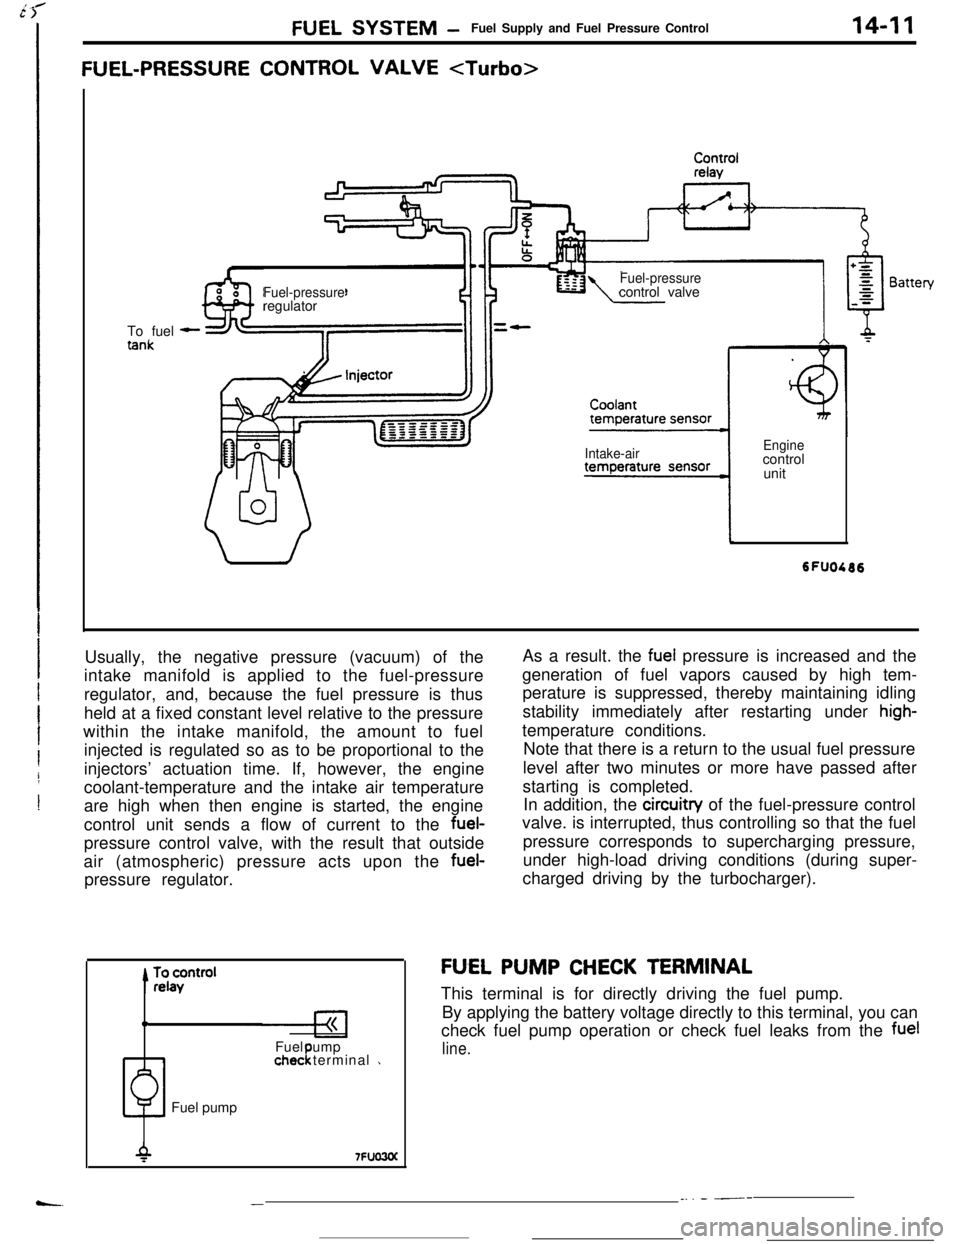 MITSUBISHI ECLIPSE 1990  Service Manual FUEL SYSTEM -Fuel Supply and Fuel Pressure Control
FUEL-PRESSURE CONTROL VALVE <Turbo>
14-11To fuel
-
Fuel-pressureregulatorFuel-pressurecontrol valve
Intake-airEnginecontrol
unit
Usually, the negativ